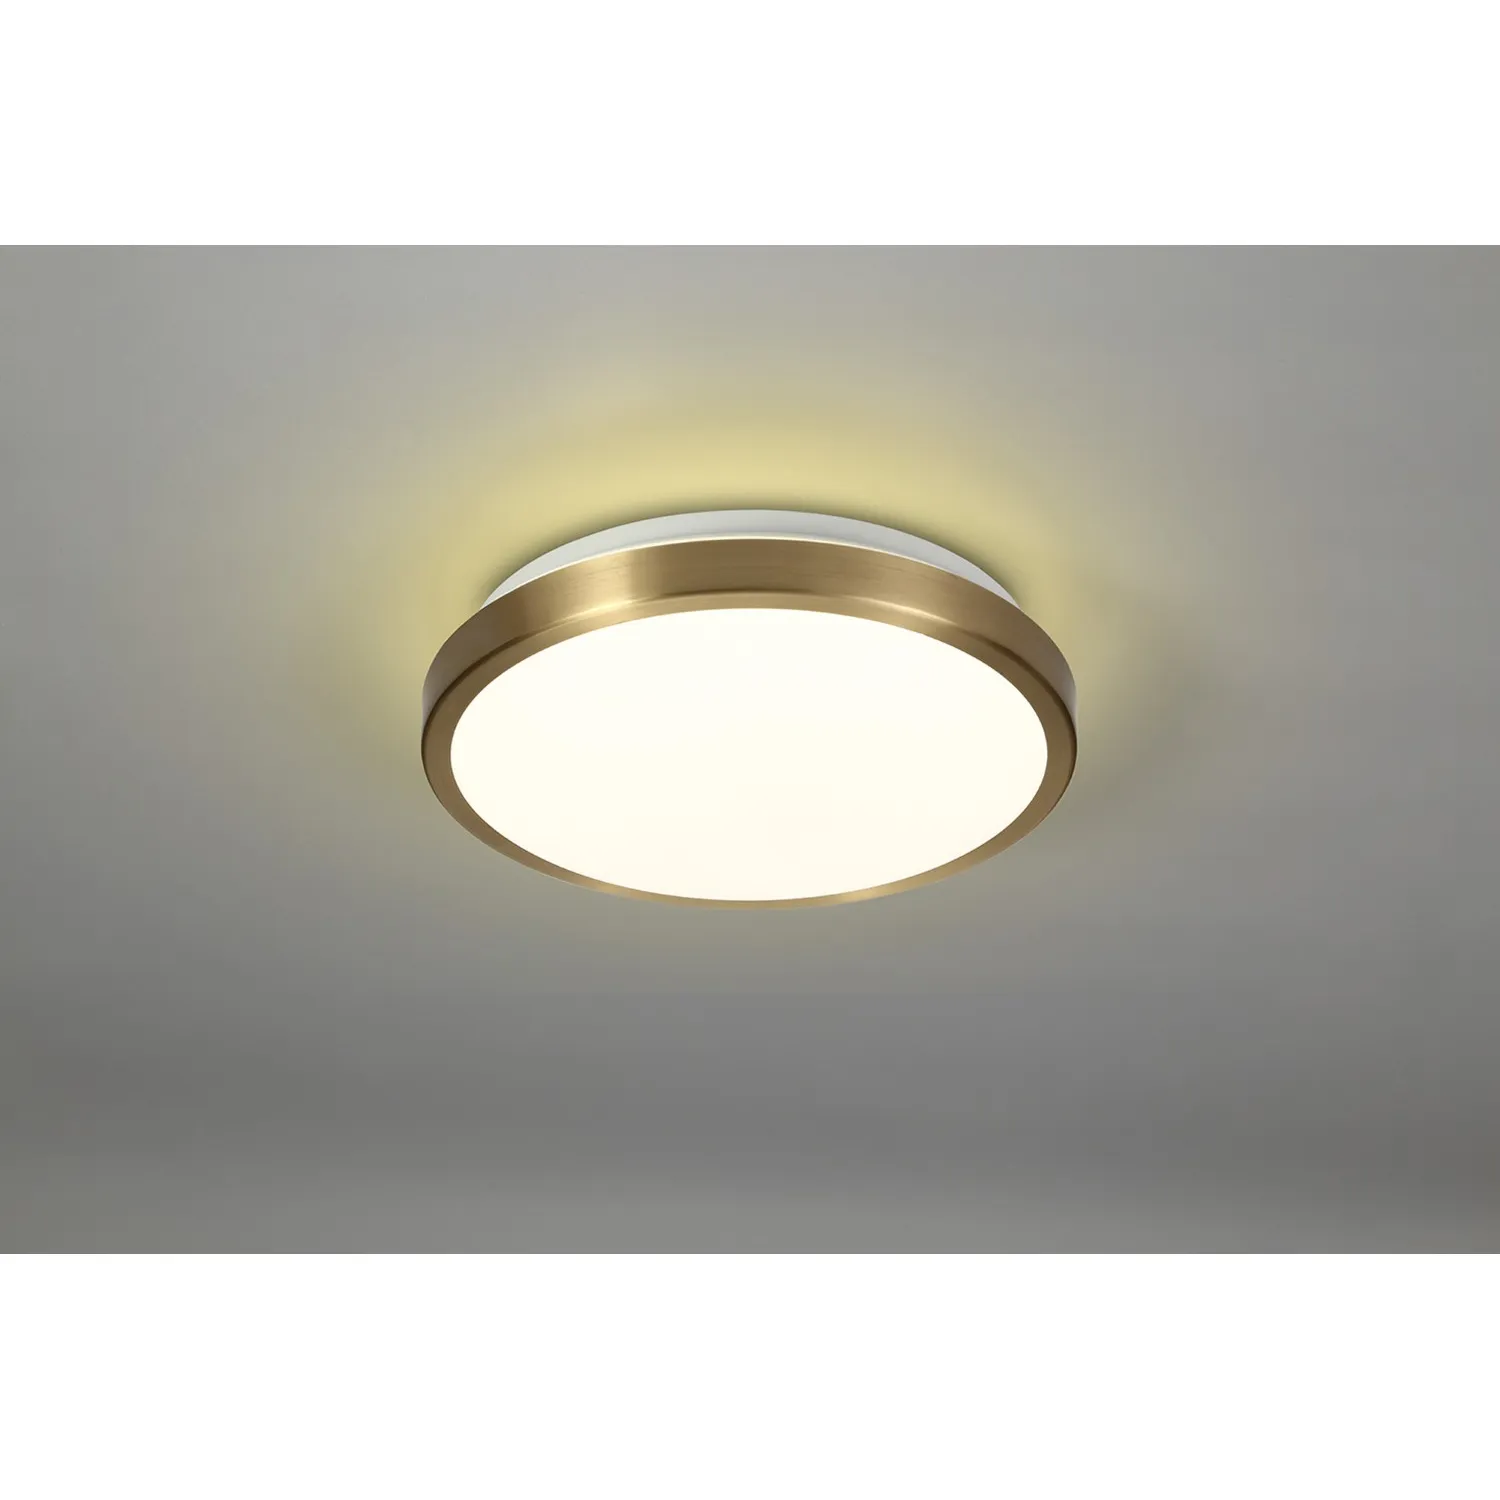 Southall Ceiling, 1 x 12W LED, 4000K, 3 Step Dimmable, 565lm, IP44, Soft Bronze White, 3yrs Warranty